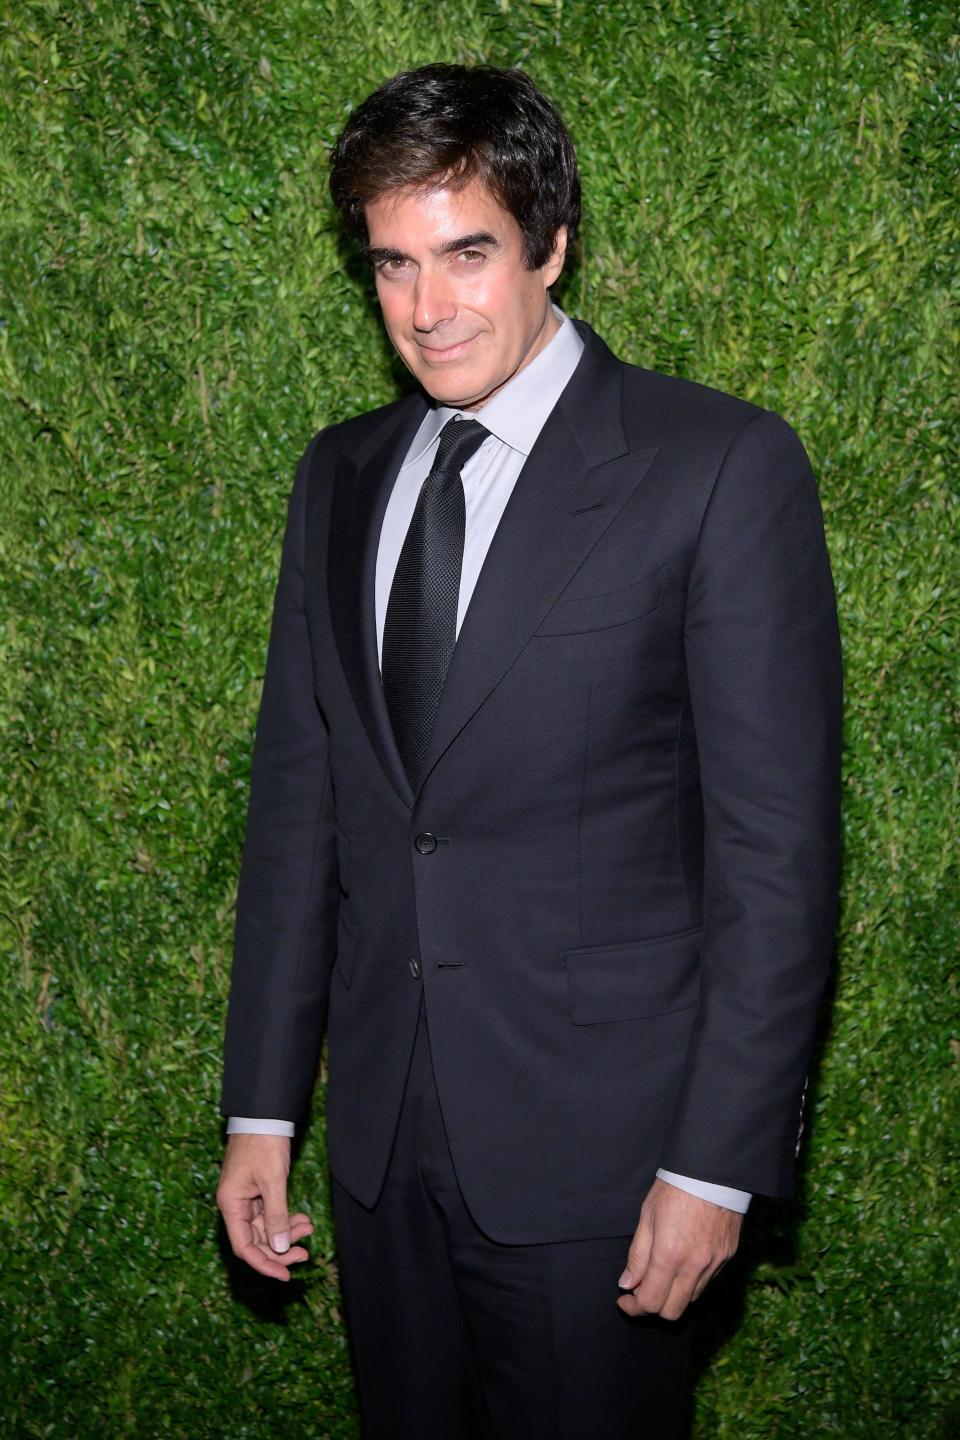 Magician David Copperfield is facing numerous allegations of sexual misconduct, stemming from an extensive investigation by The Guardian.